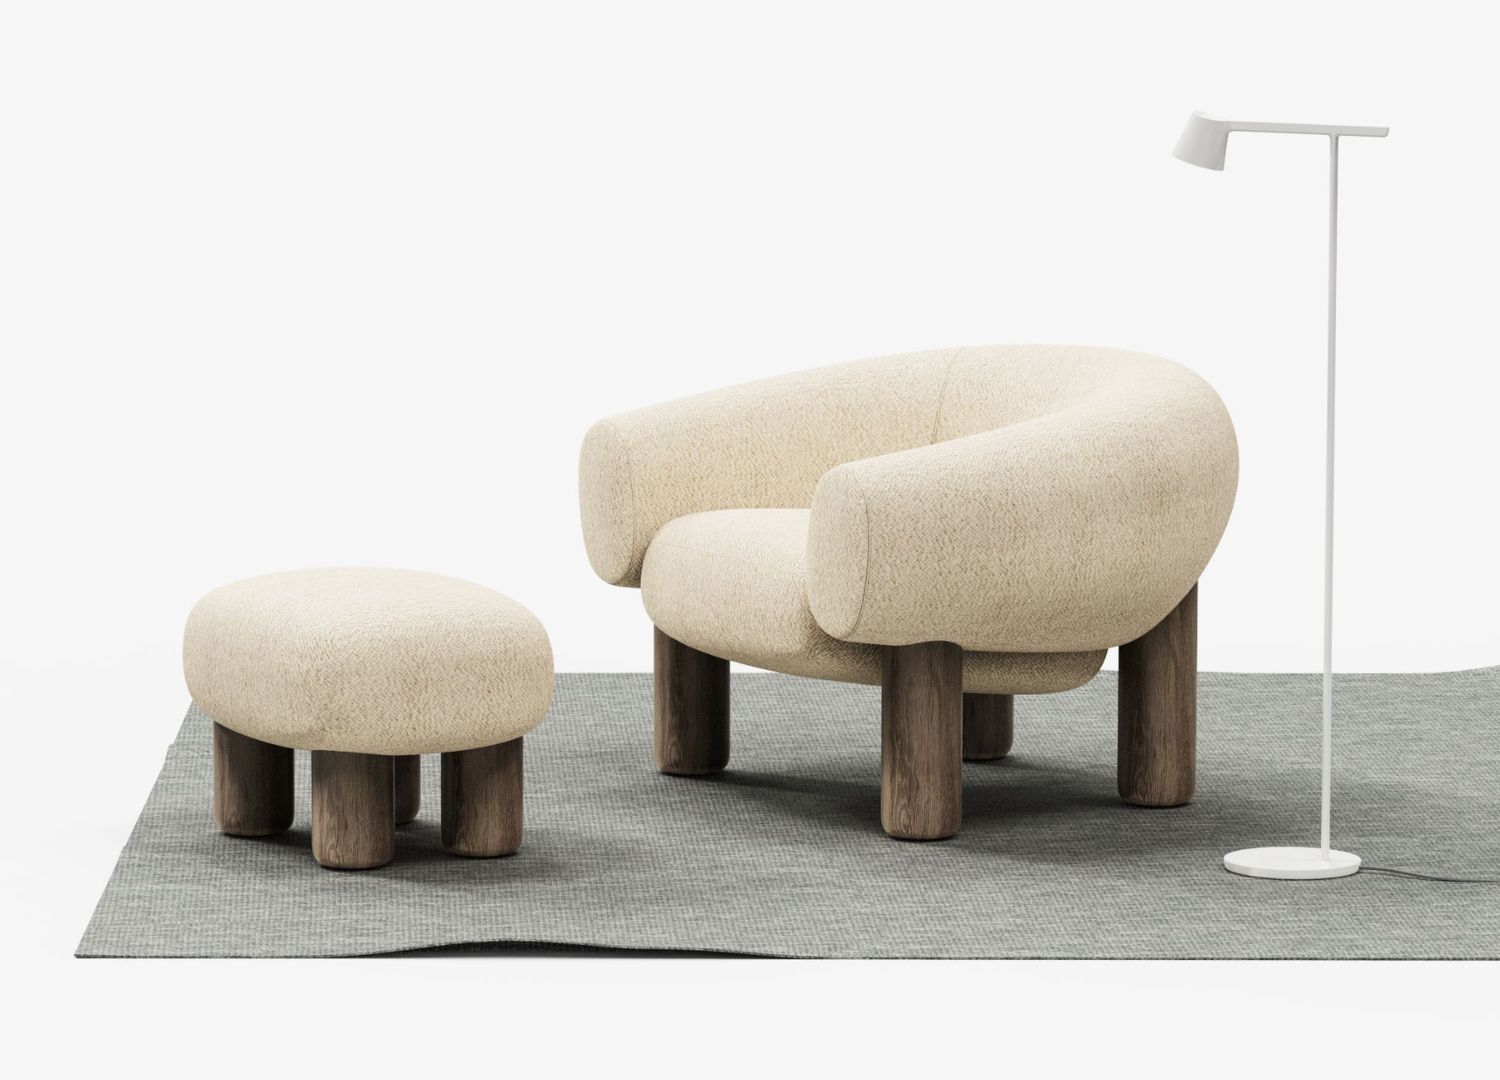 Chubby Bear Chair by Femo Design Studio by Femo Wong